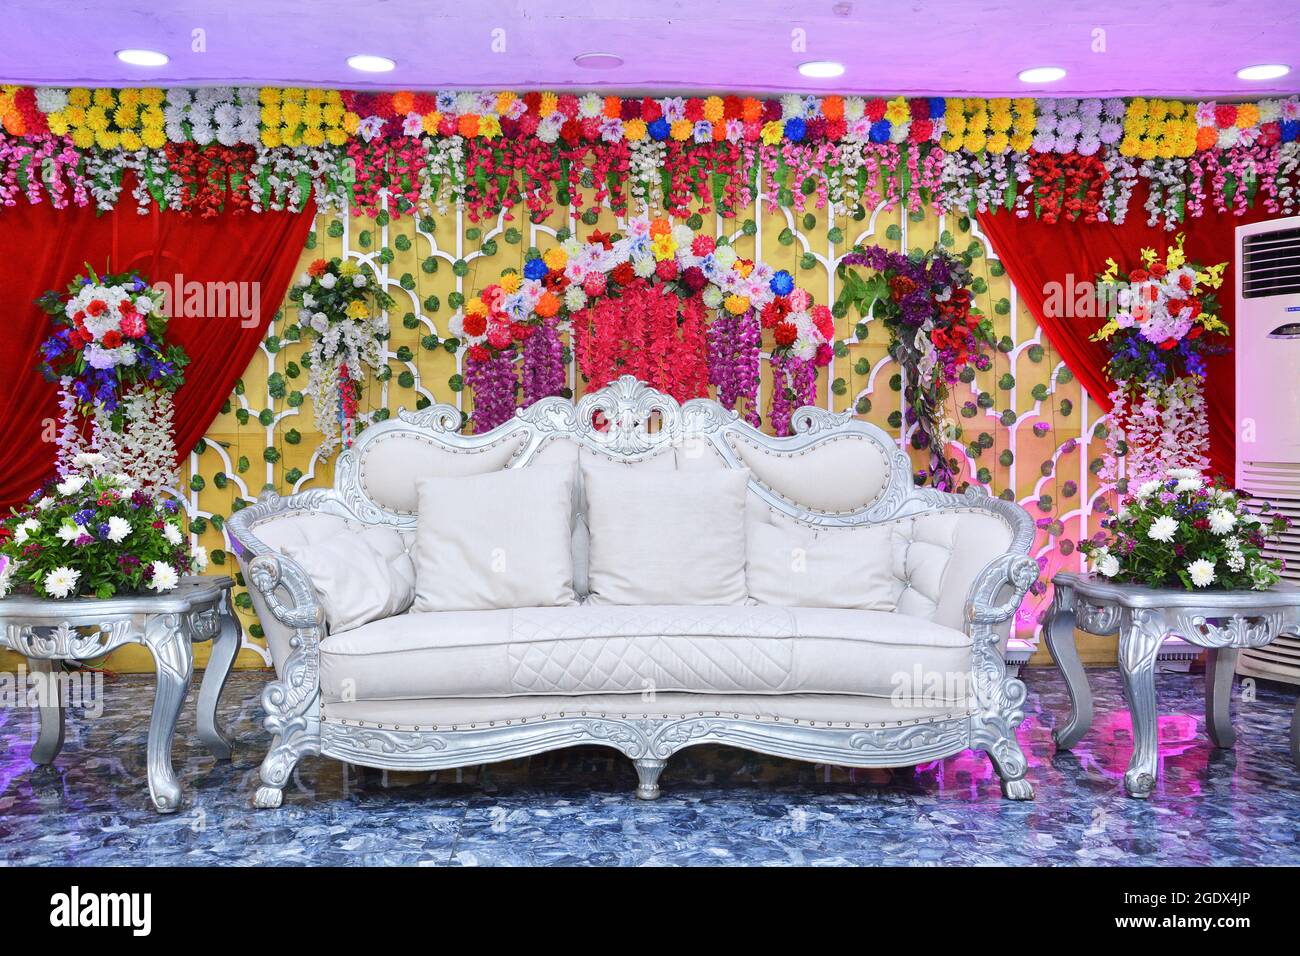 Banquet Hall Stage Decorated With Flowers Marriage Bride And